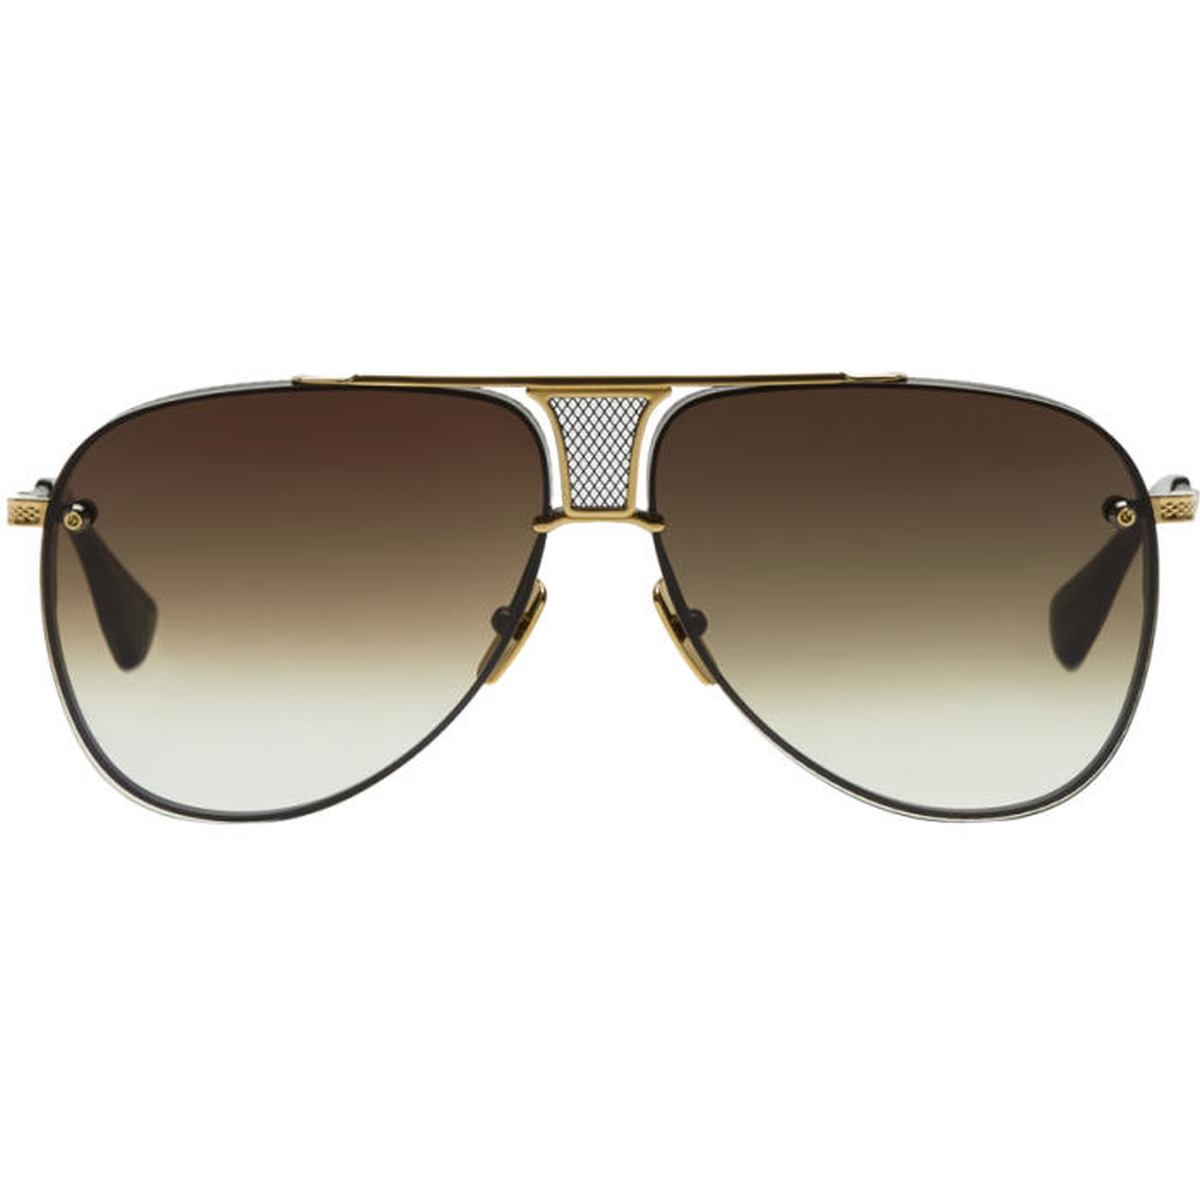 Dita Black and Gold Limited Edition Decade-Two Sunglasses Dita